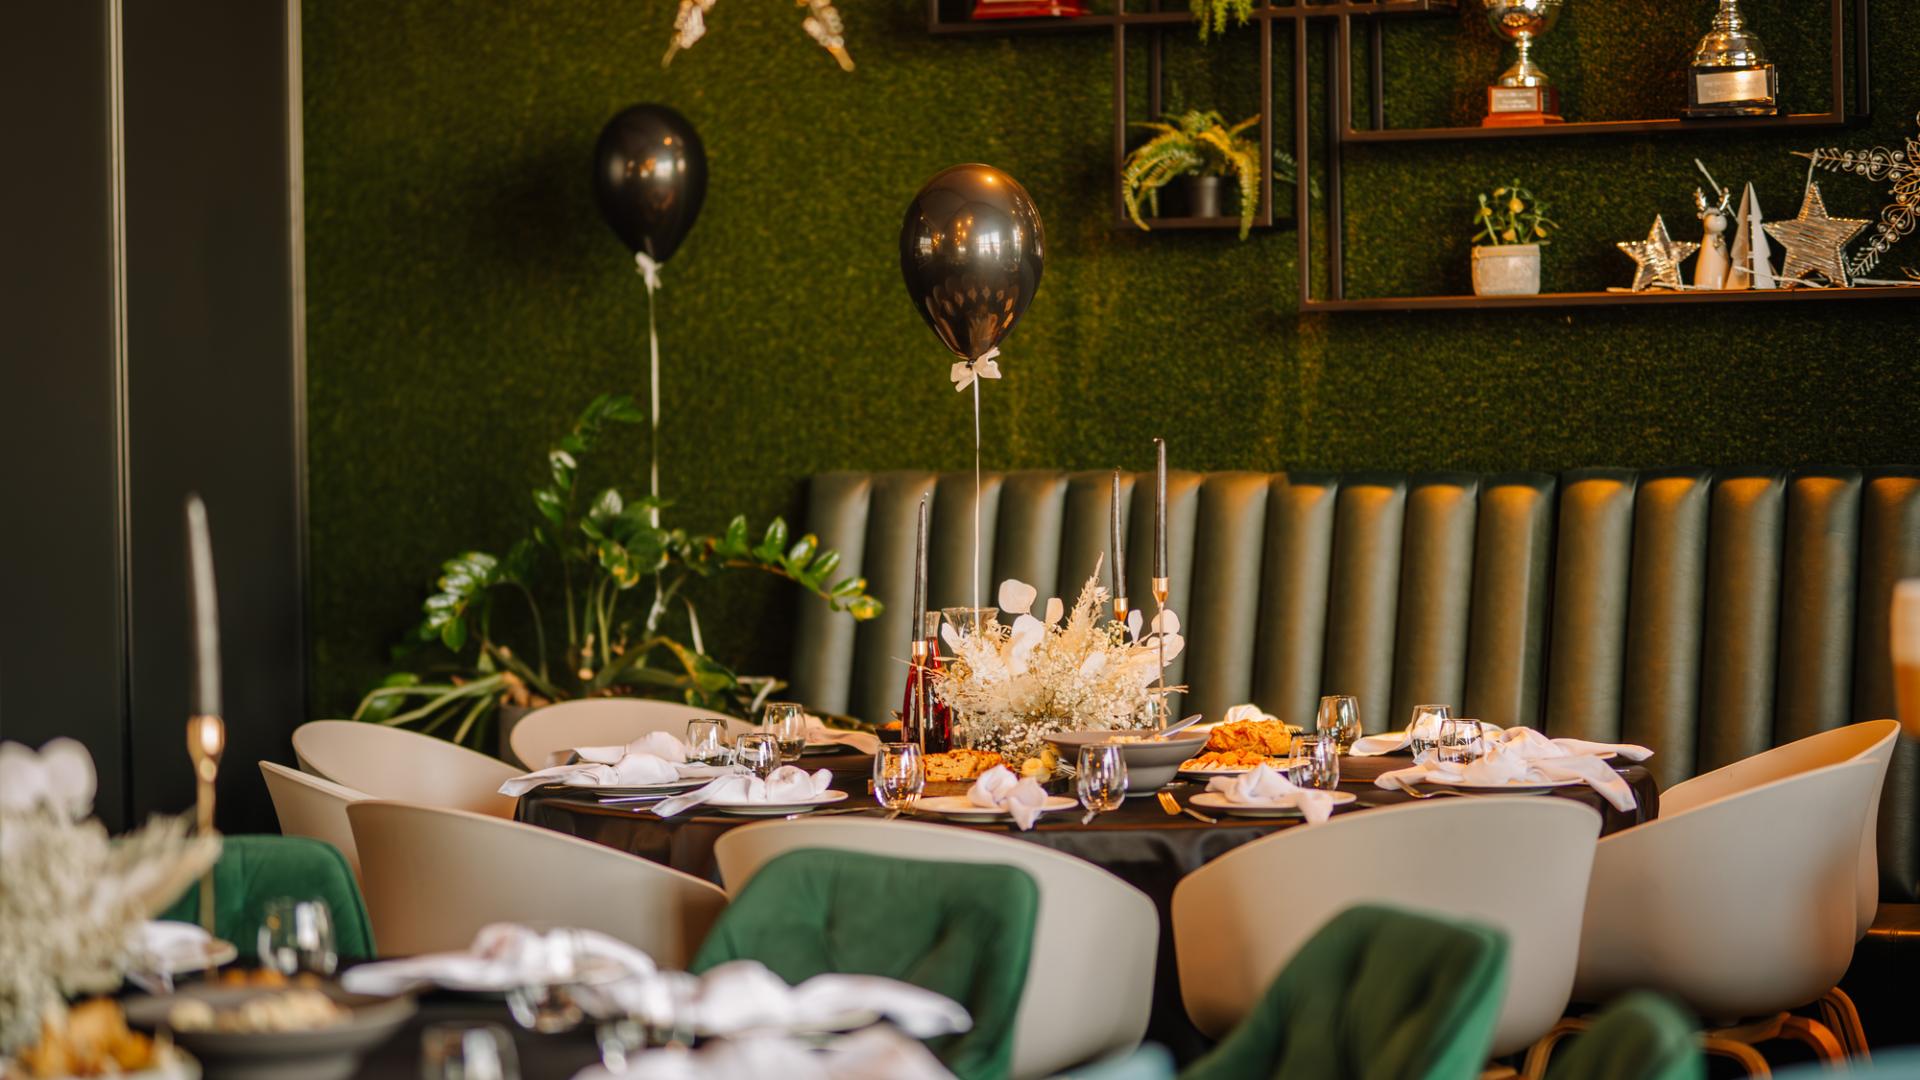 Dinner Party Venues for Hire in London